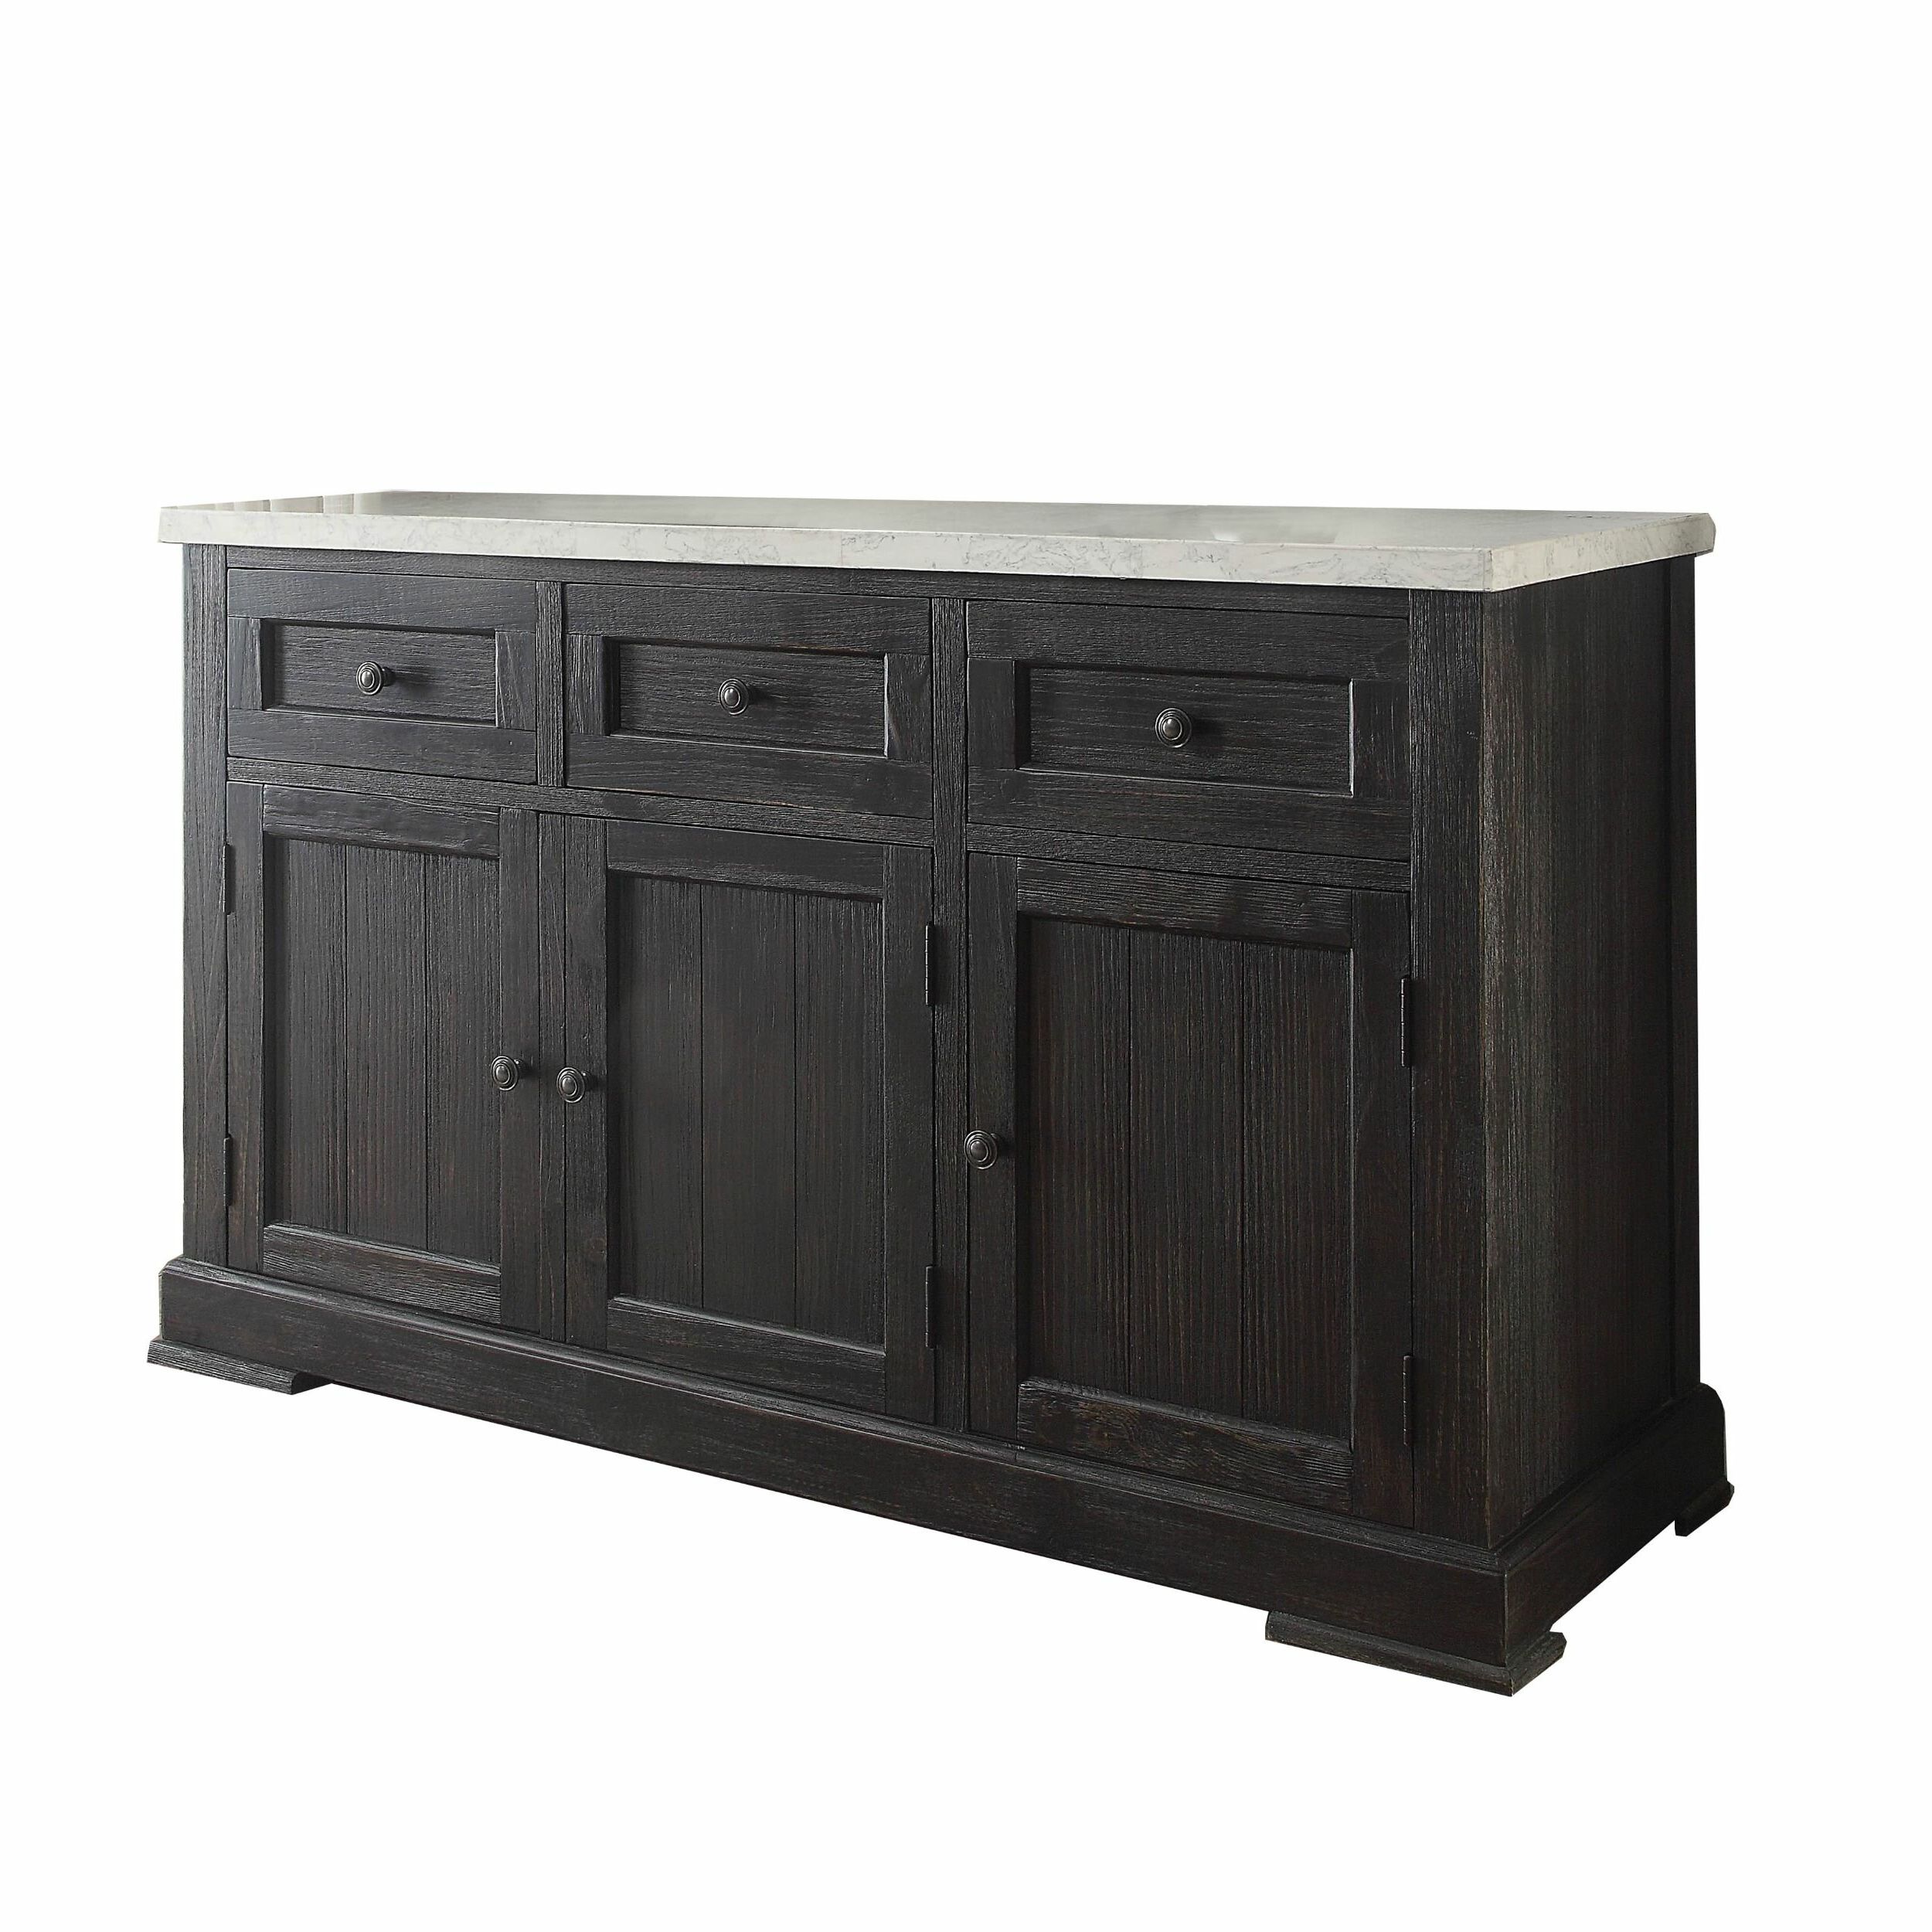 Ballintoy Wooden Sideboard Intended For Ellenton Sideboards (View 6 of 20)